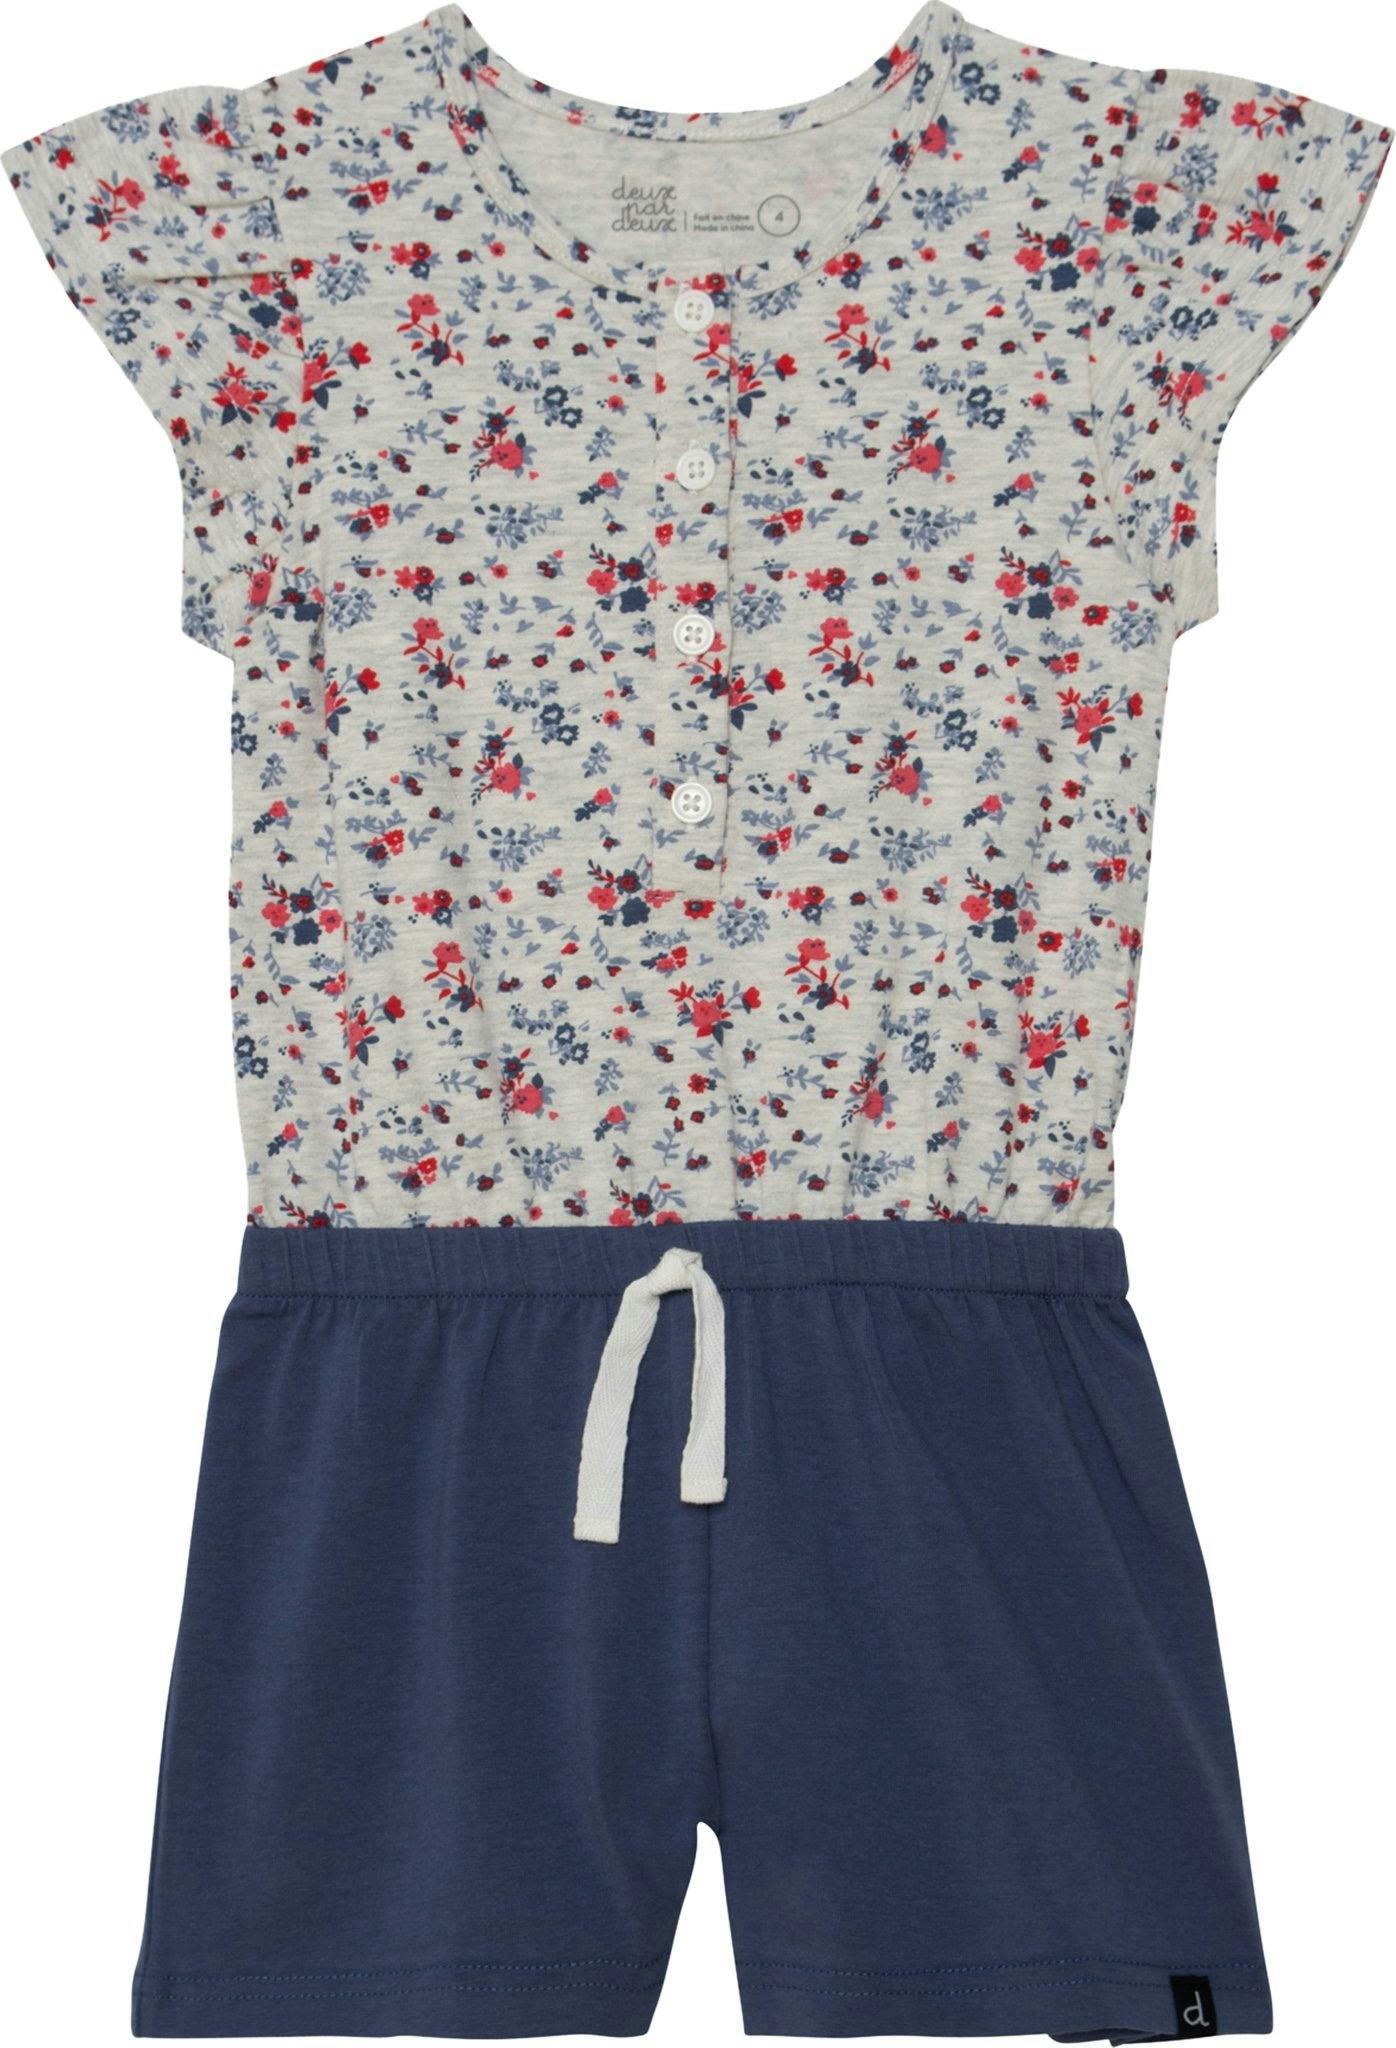 Product image for Organic Cotton Printed Little Flowers Short Sleeve Jumpsuit - Little Girls